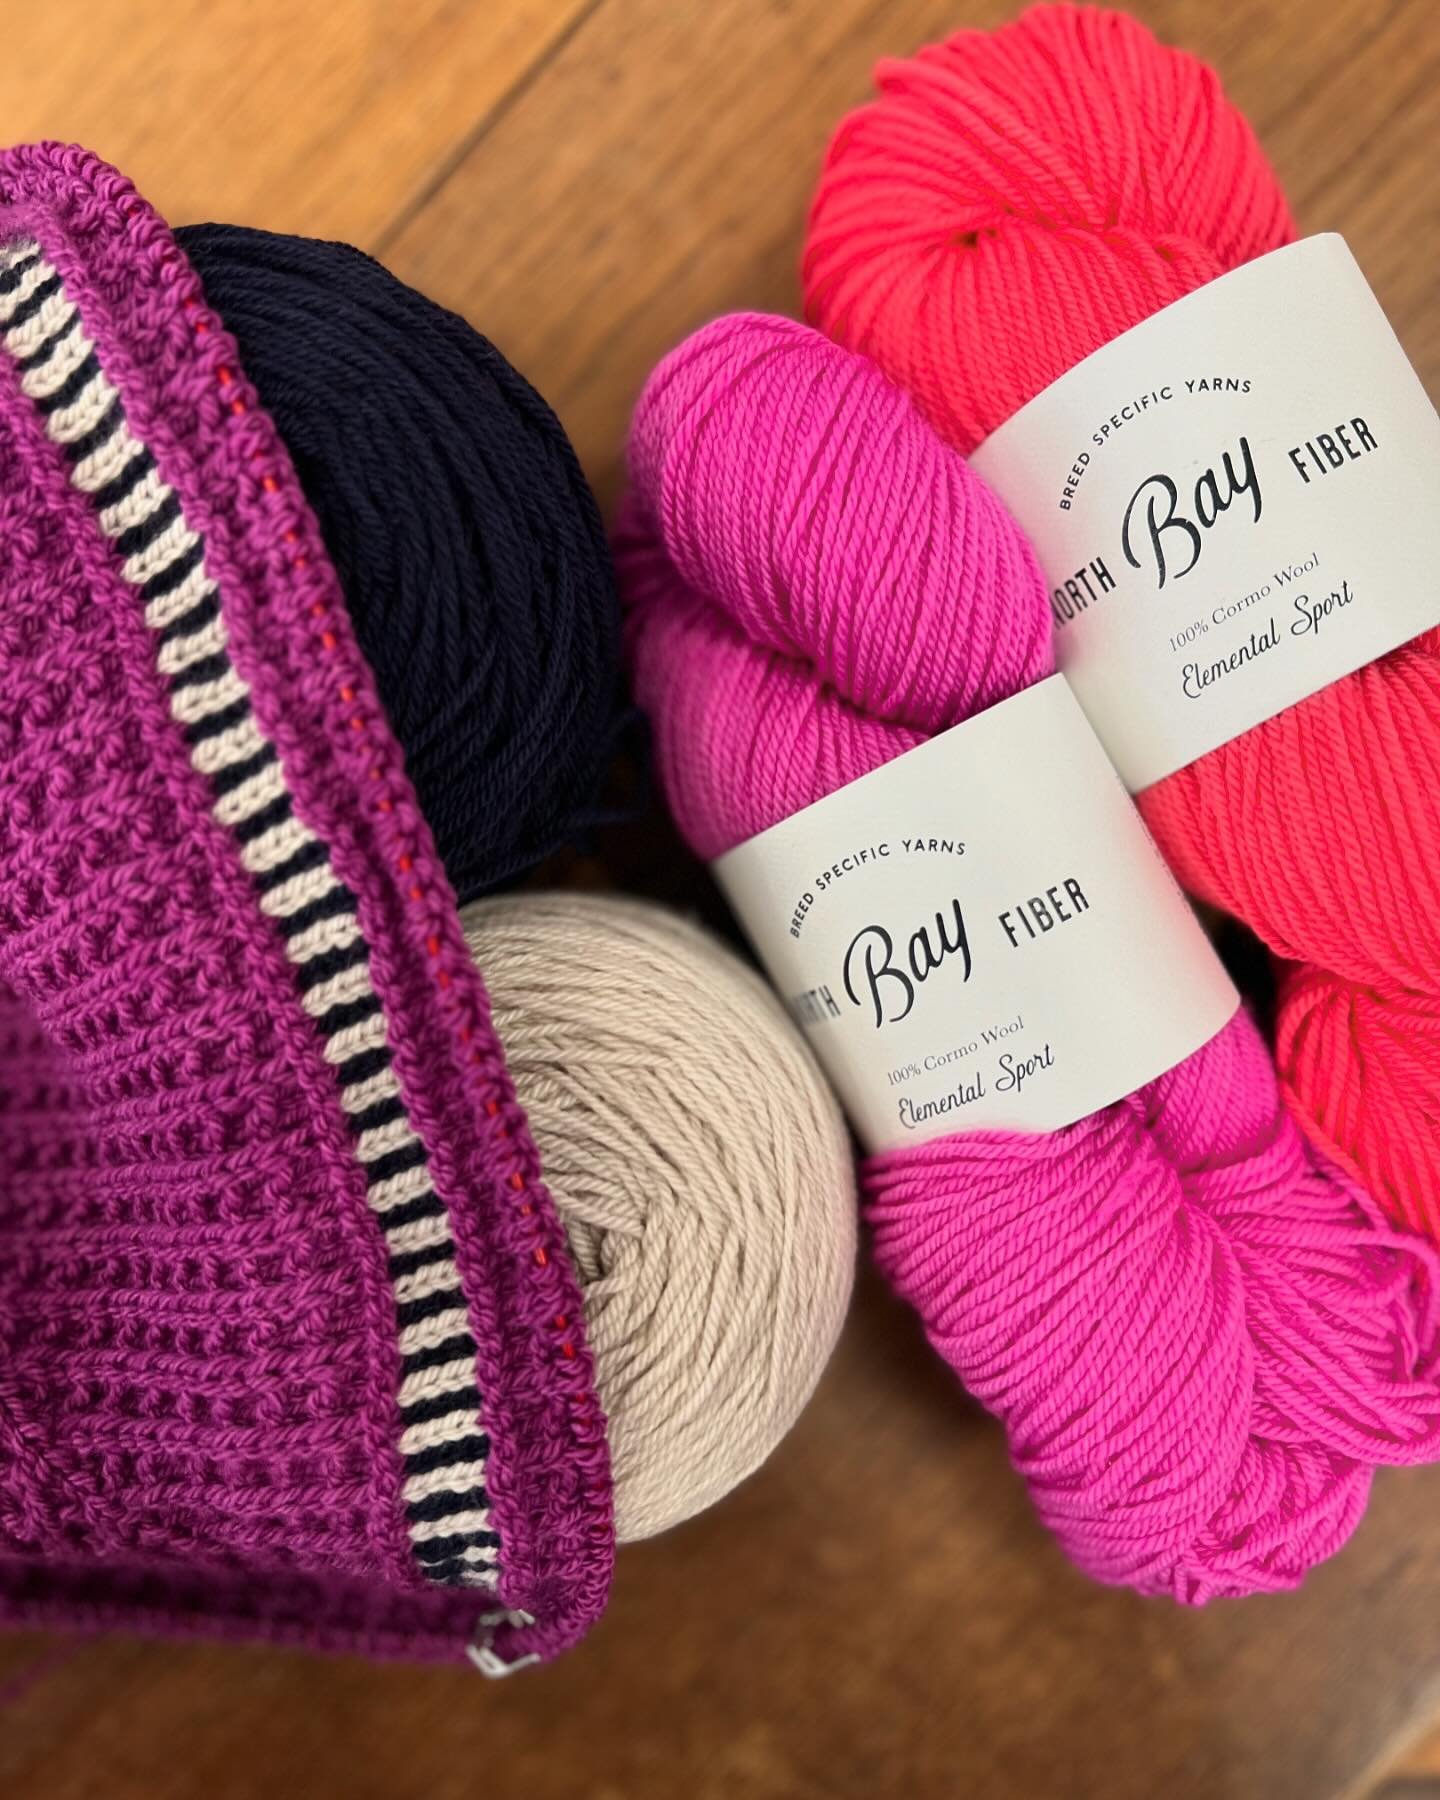 This is Meredith&rsquo;s #mkartuskal color palette! Using gorgeous @northbayfiber yarn - we can&rsquo;t wait to see it progress!! 

Stay tuned for a little waffle stitch tutorial from her soon!

#artusshawl #moonstruckknits 

Our shop hours:
Monday-T